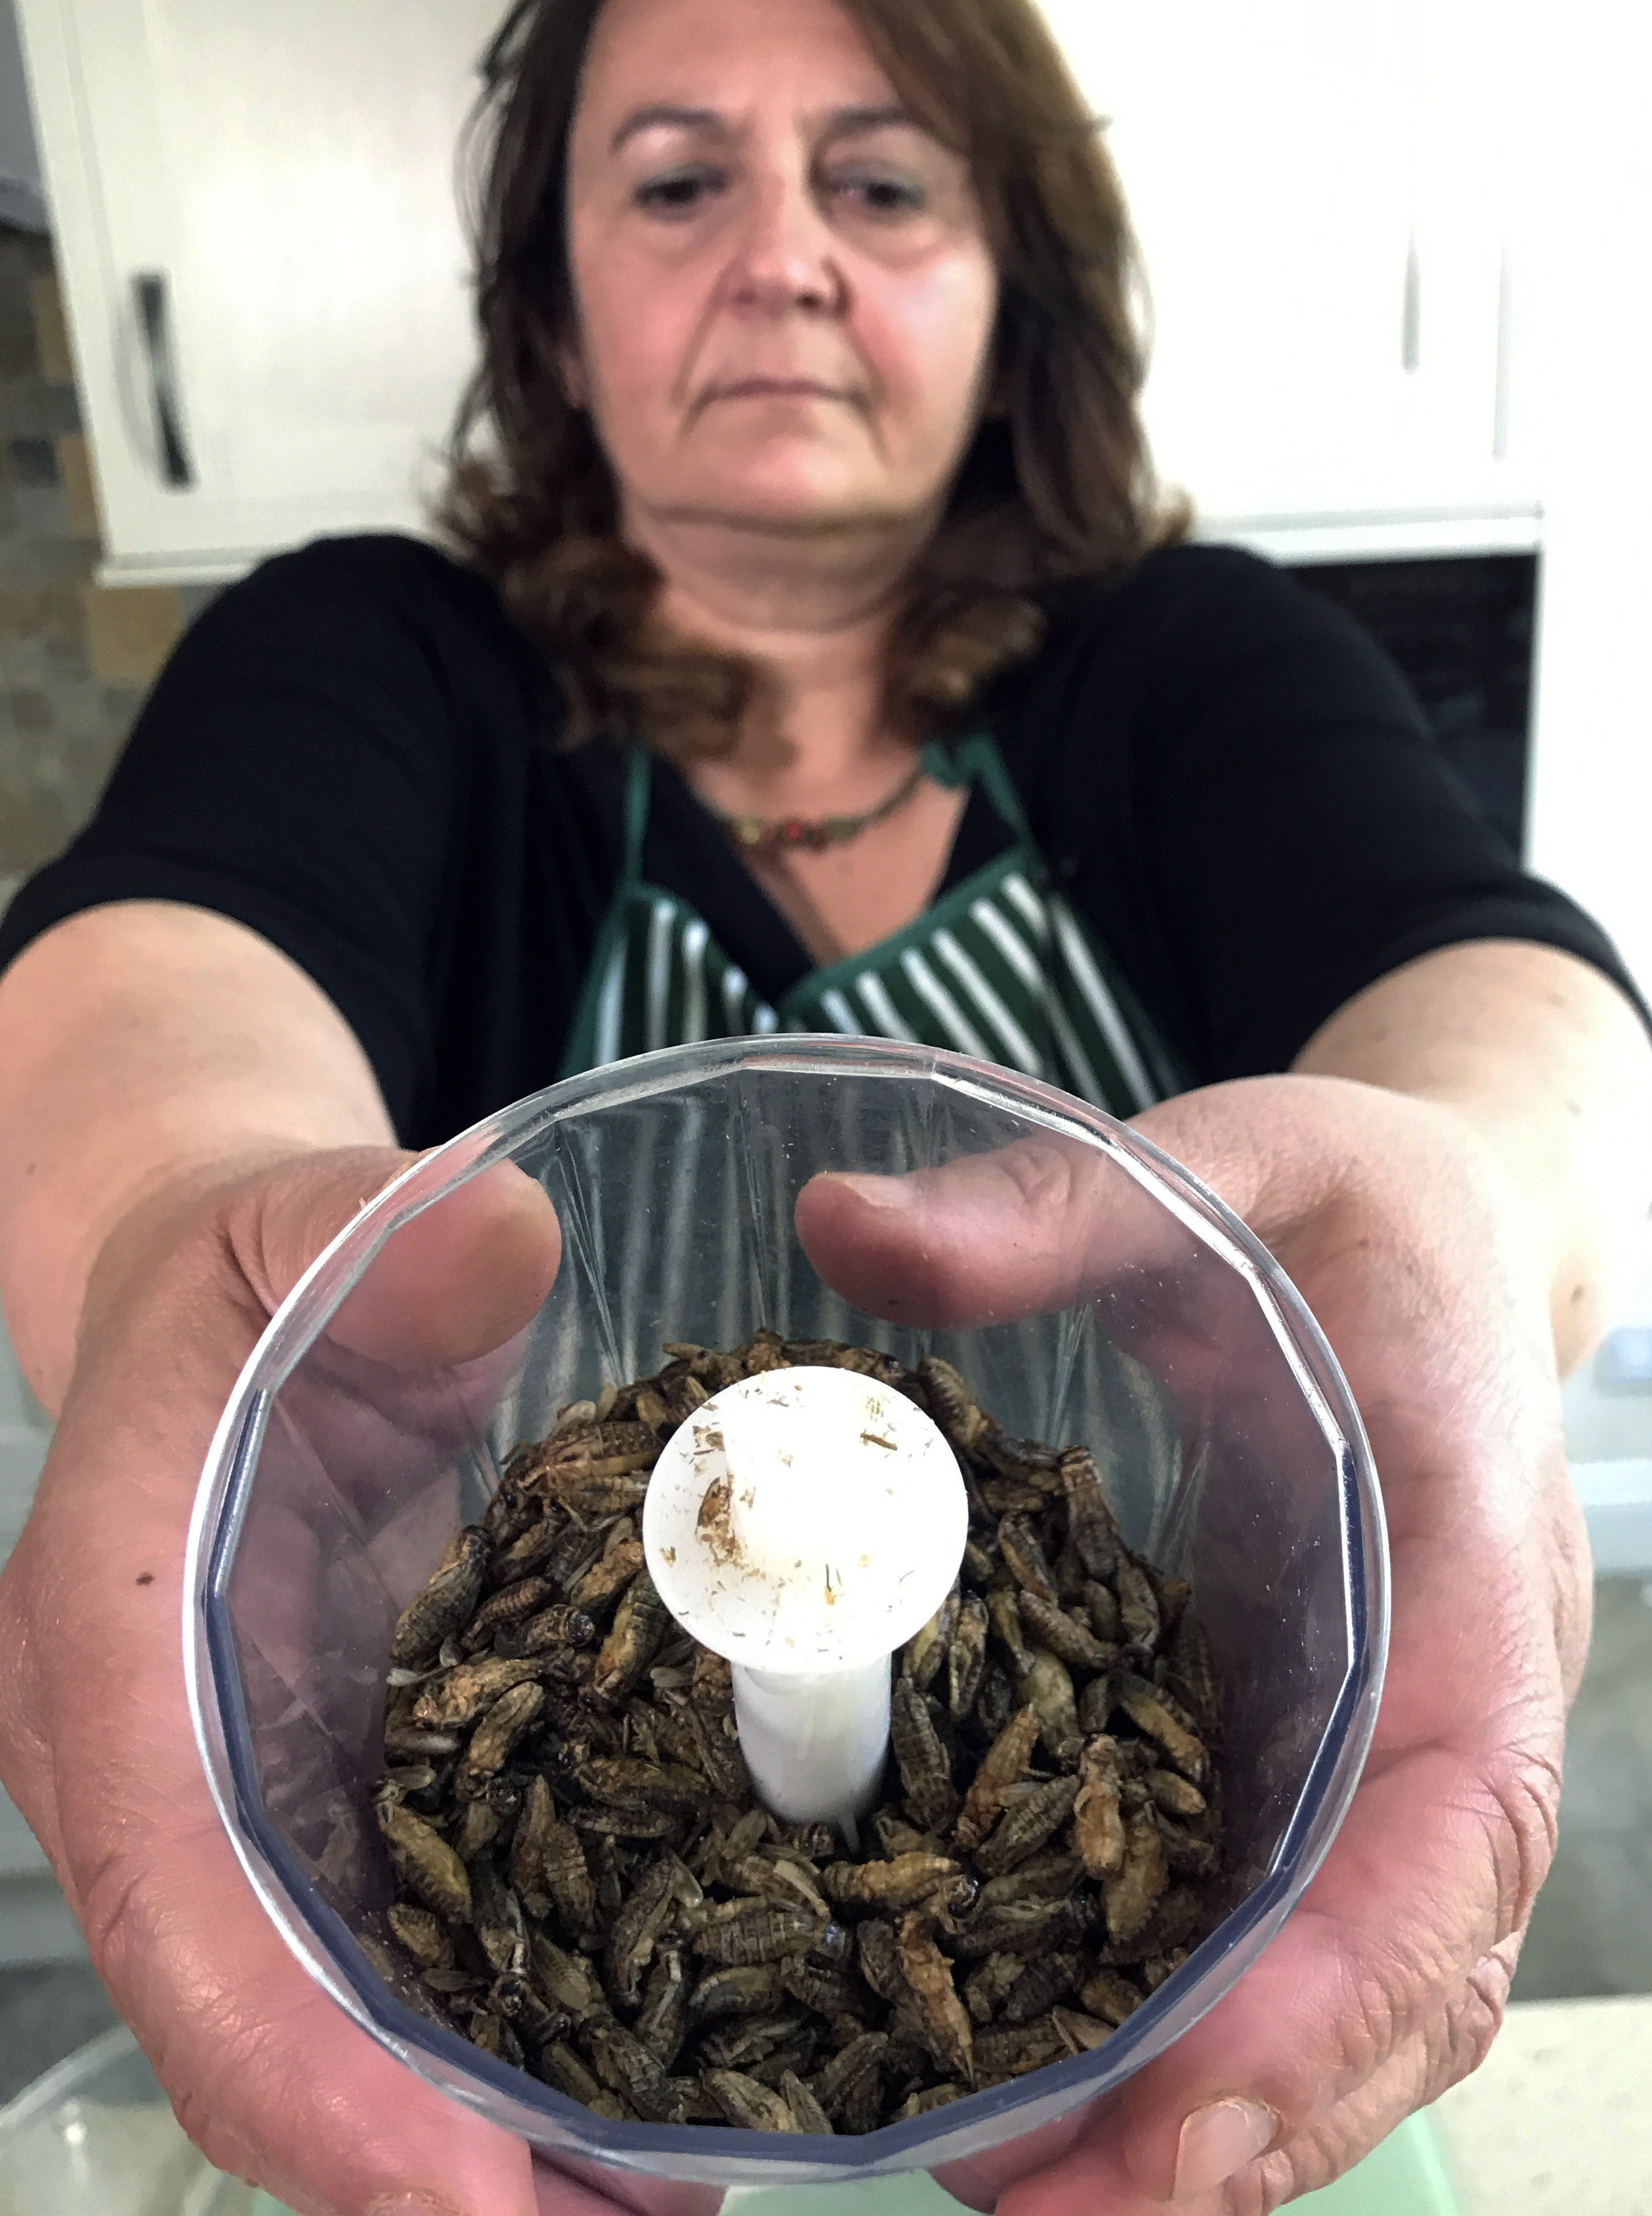 Tiziana di Costanzo, co-founder of Horizon Insects, holds up a cup of dried crickets to be ground up and added to pizza dough, in her London kitchen on June 2, 2021. While insects are commonly eaten in parts of Asia and Africa, they’re increasingly seen as a viable food source in the West as Earthâs growing population puts more pressure on global food production. Experts say theyâre rich in protein, yet can be raised much more sustainably than beef or pork. Regulatory change has also made things easier for European companies looking to market insects directly to consumers. (AP Photo/Kelvin Chan)